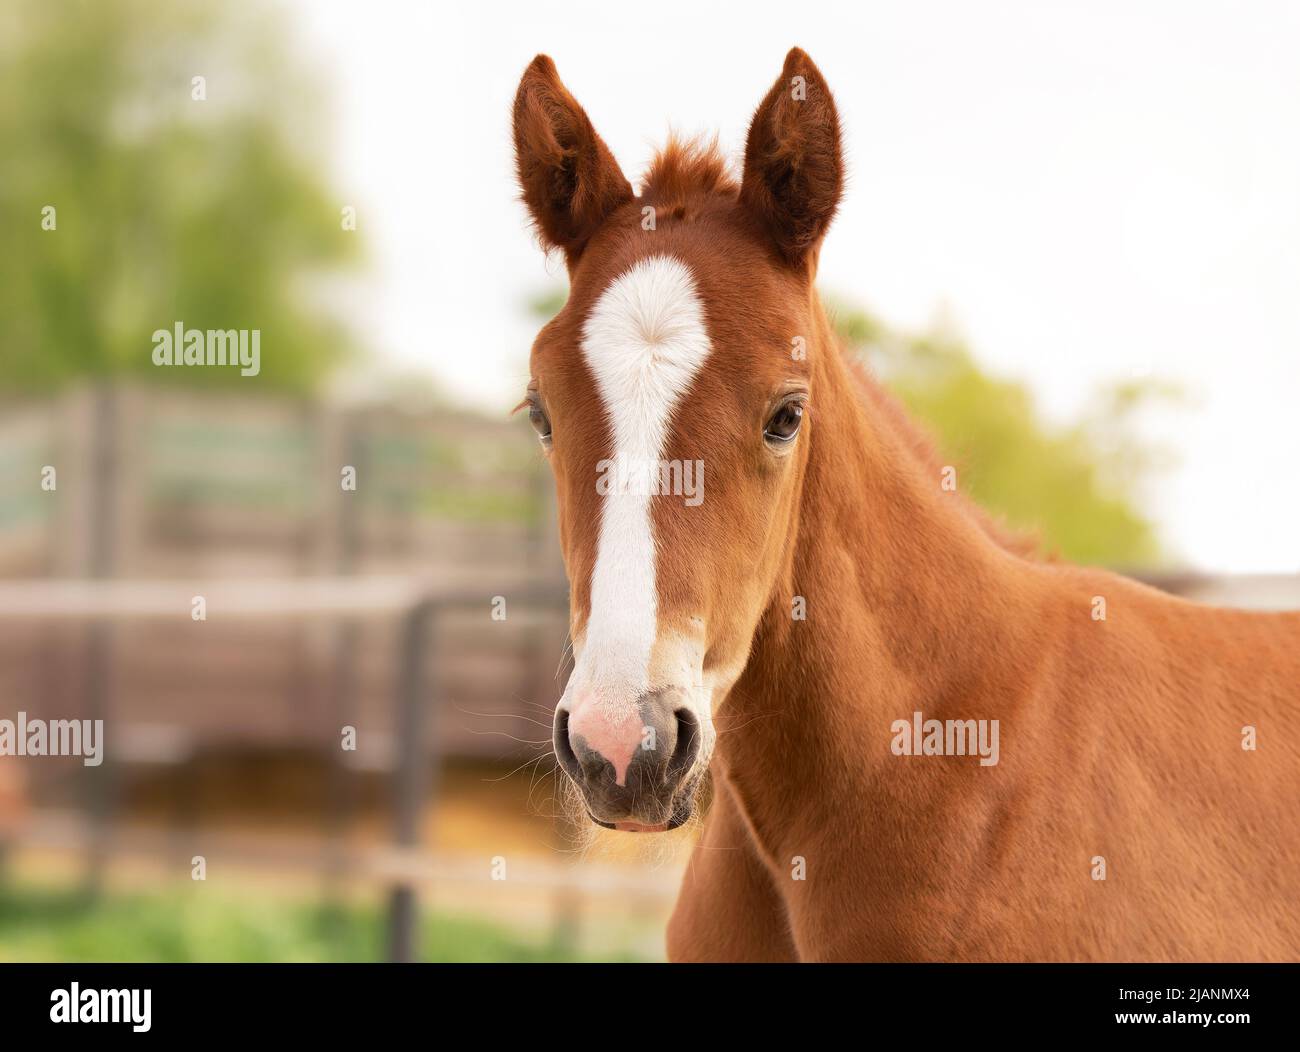 The foal's head is a close-up. Portrait of a thoroughbred colt grazing in a meadow. Pasture on a sunny summer day. Summer background Stock Photo